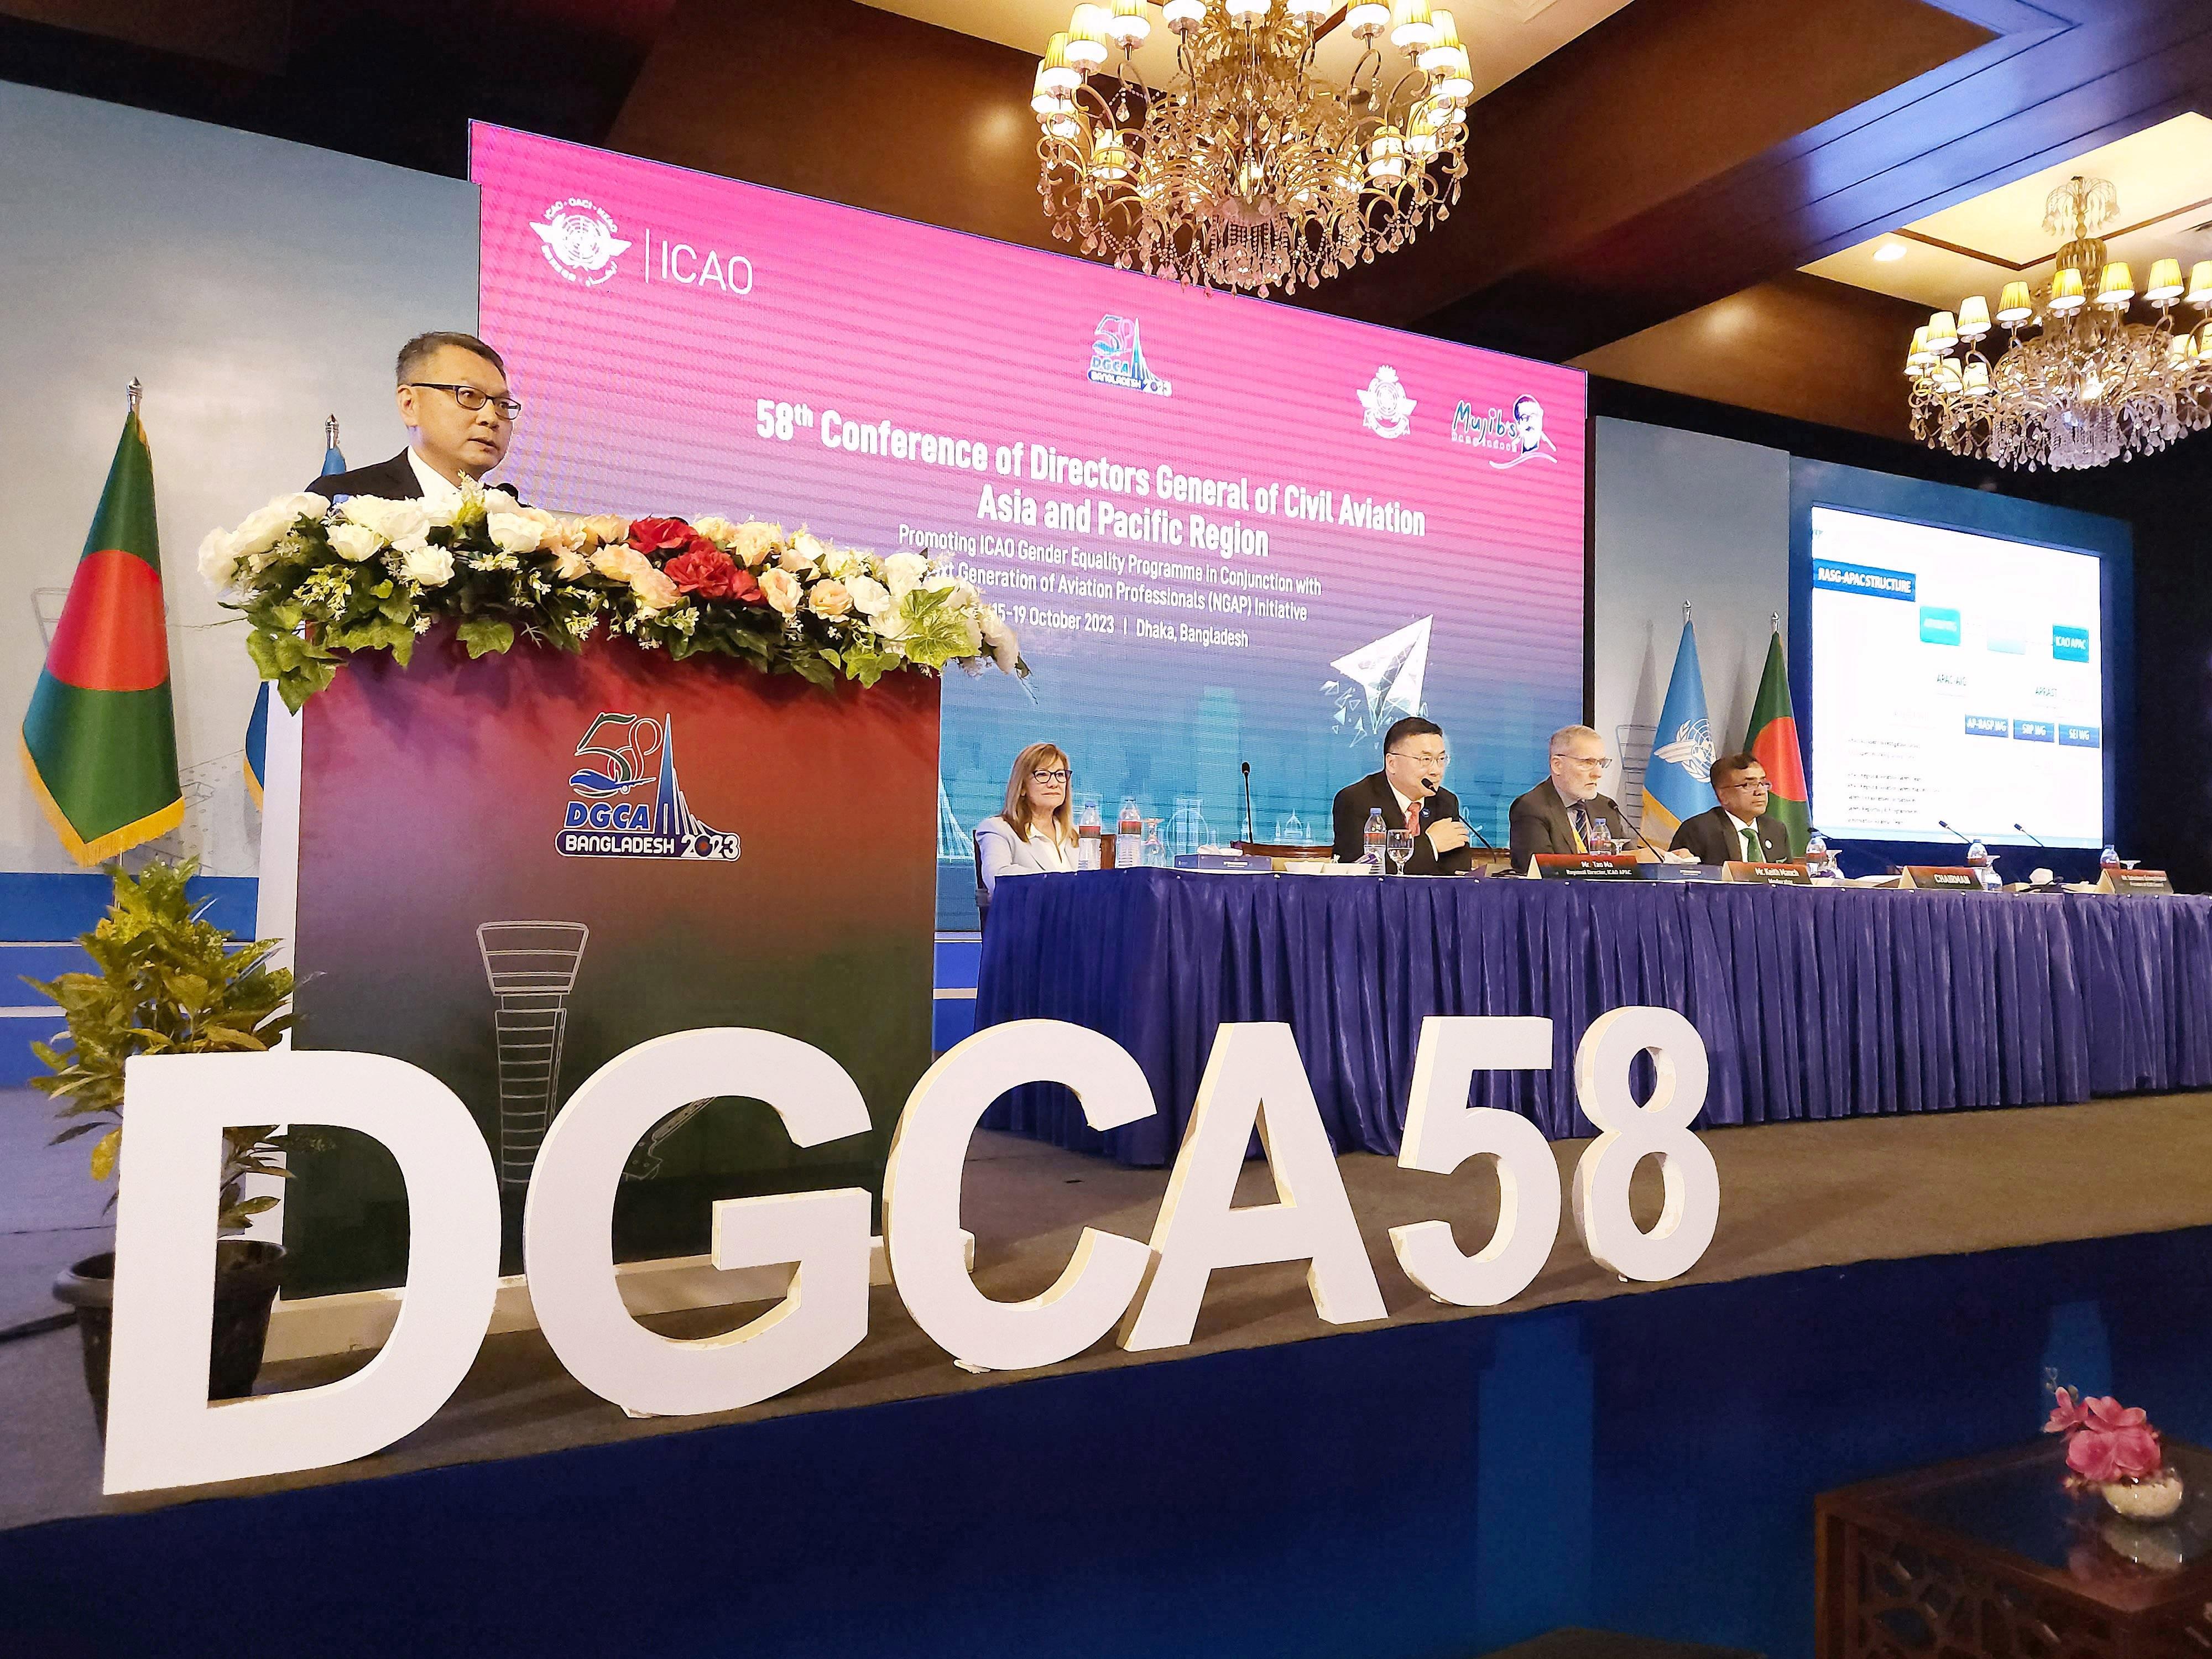 The 58th Conference of Directors General of Civil Aviation, Asia and Pacific Regions was held in Dhaka, Bangladesh, from October 15 to 19. Photo shows the Director-General of Civil Aviation of Hong Kong, Mr Victor Liu (first left), delivering the Chairperson's remarks for the Regional Aviation Safety Group - Asia and Pacific Regions of the International Civil Aviation Organization at the Conference.